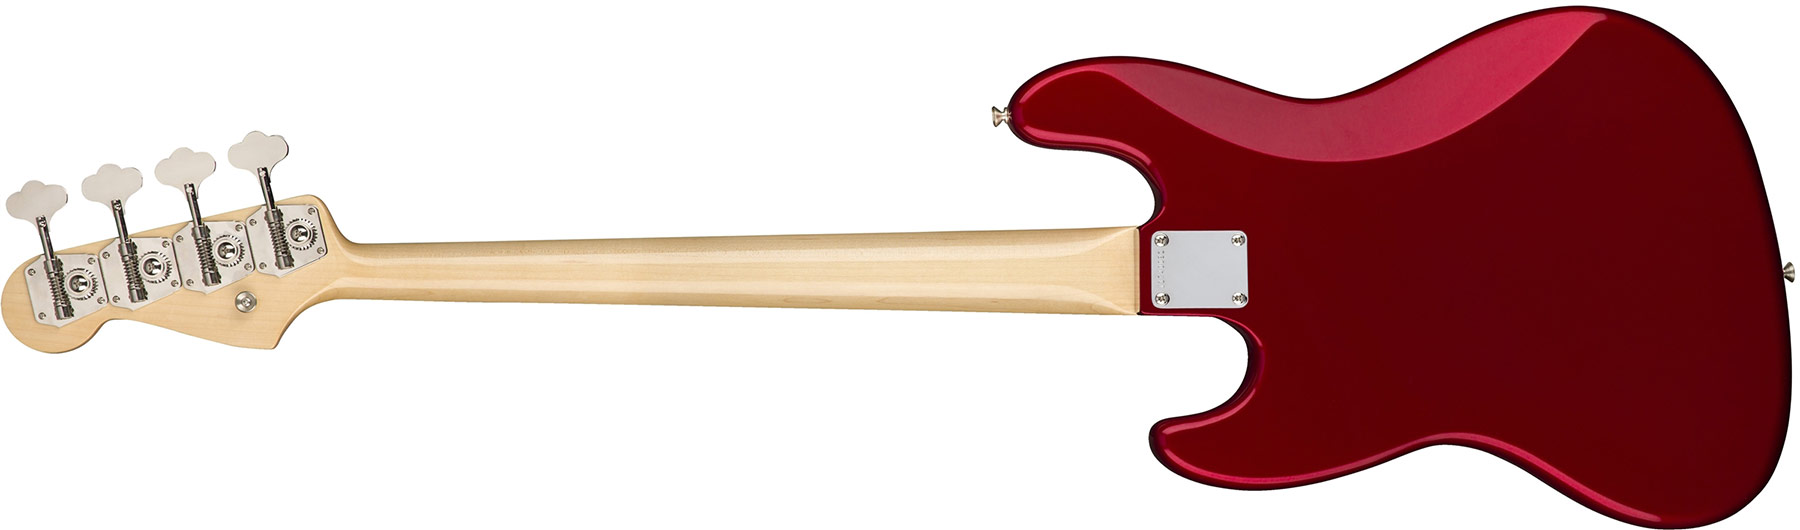 Fender Jazz Bass '60s American Original Usa Rw - Candy Apple Red - Basse Électrique Solid Body - Variation 2